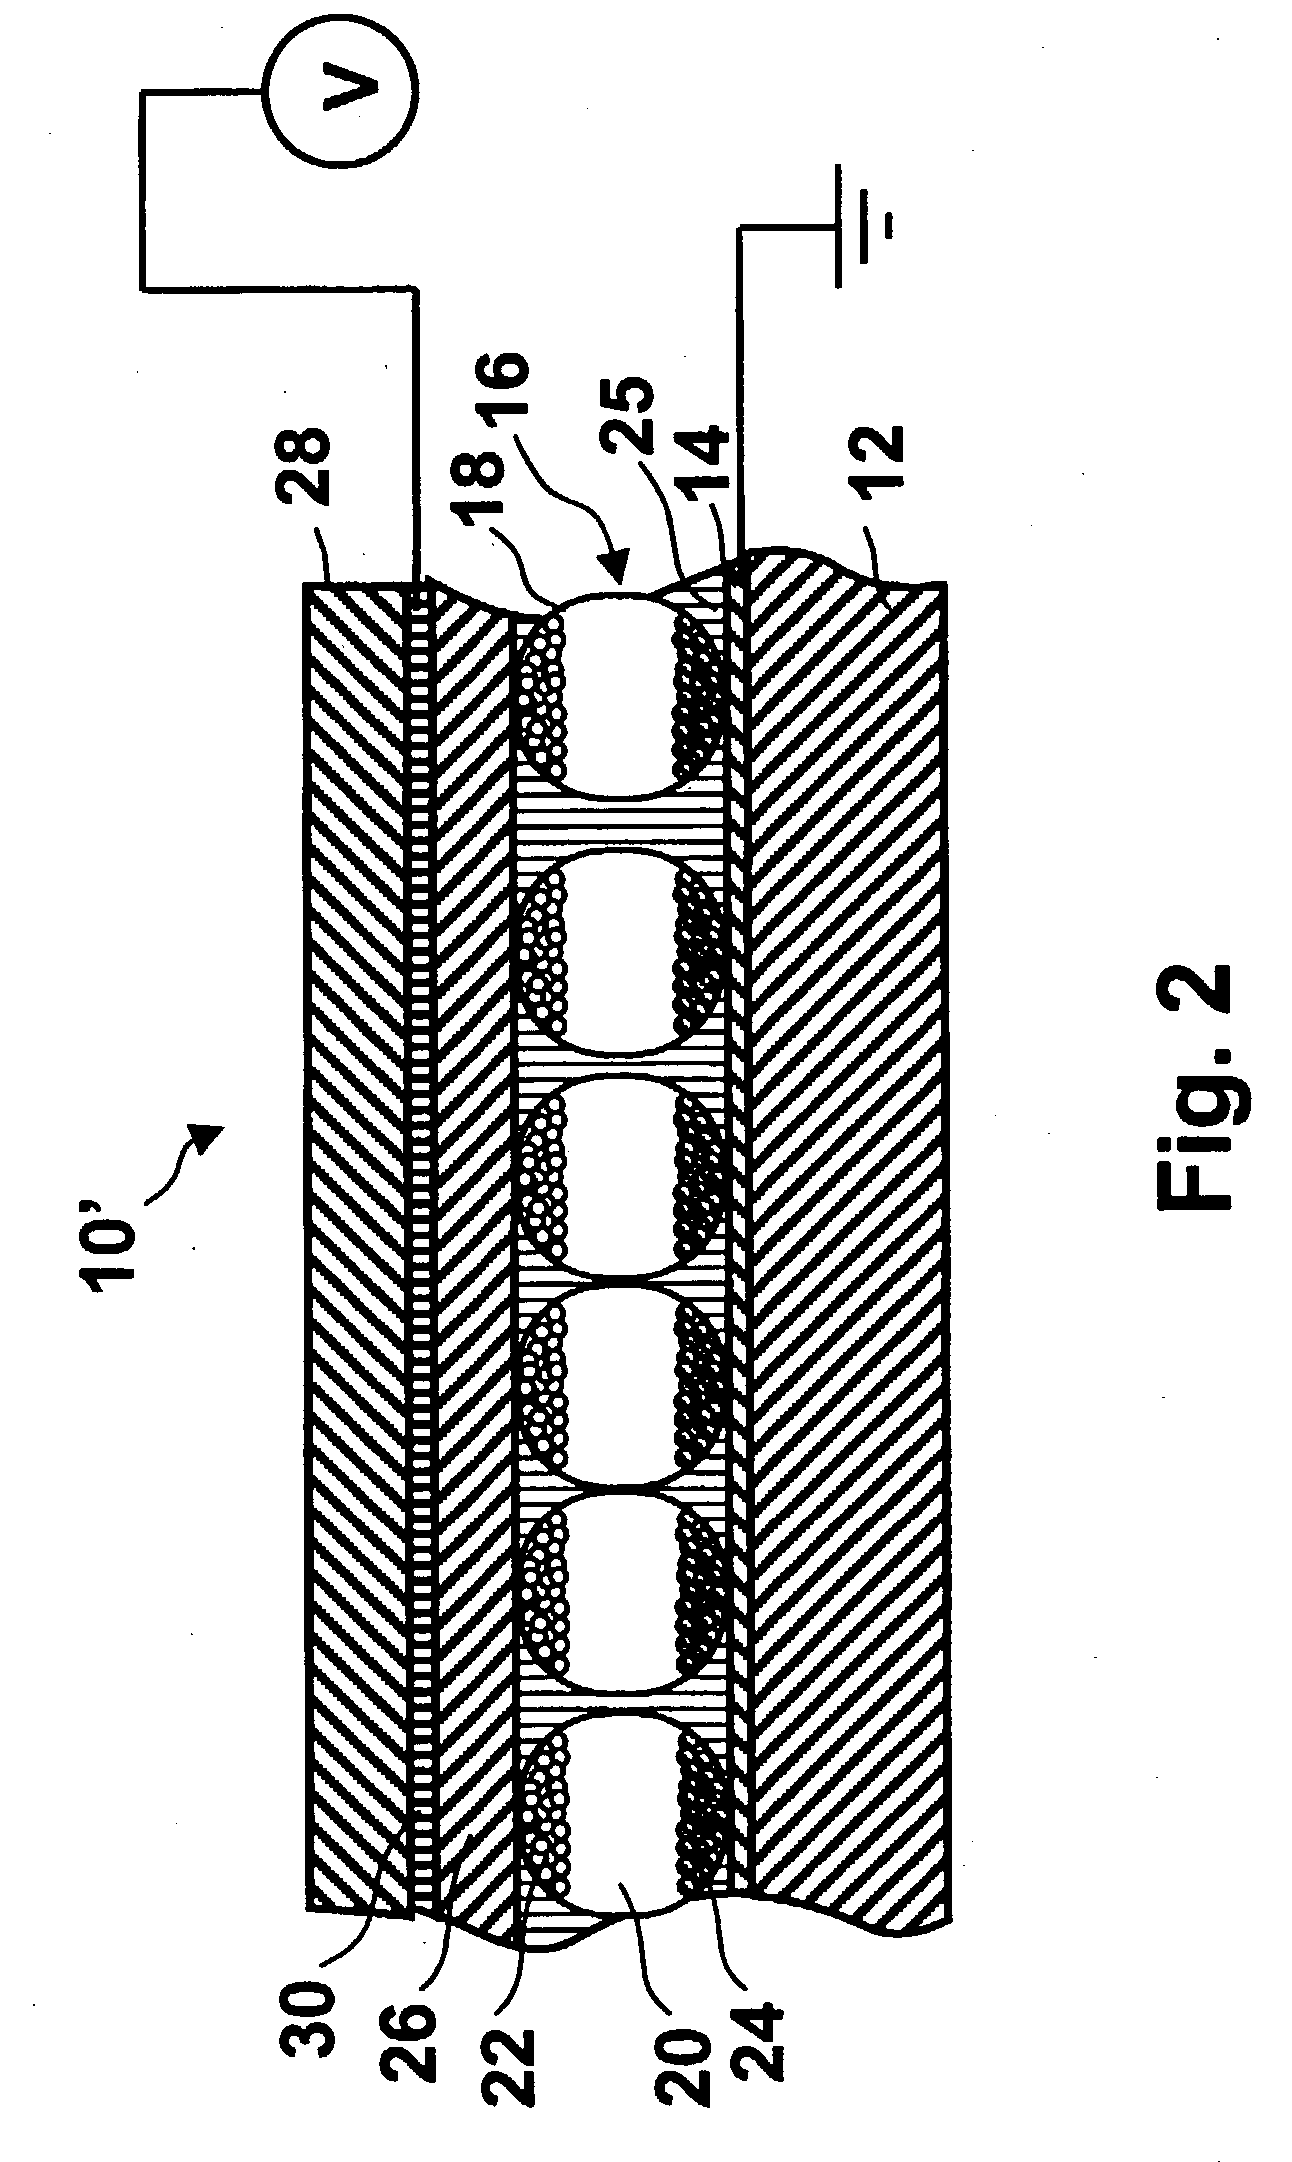 Components and methods for use in electro-optic displays